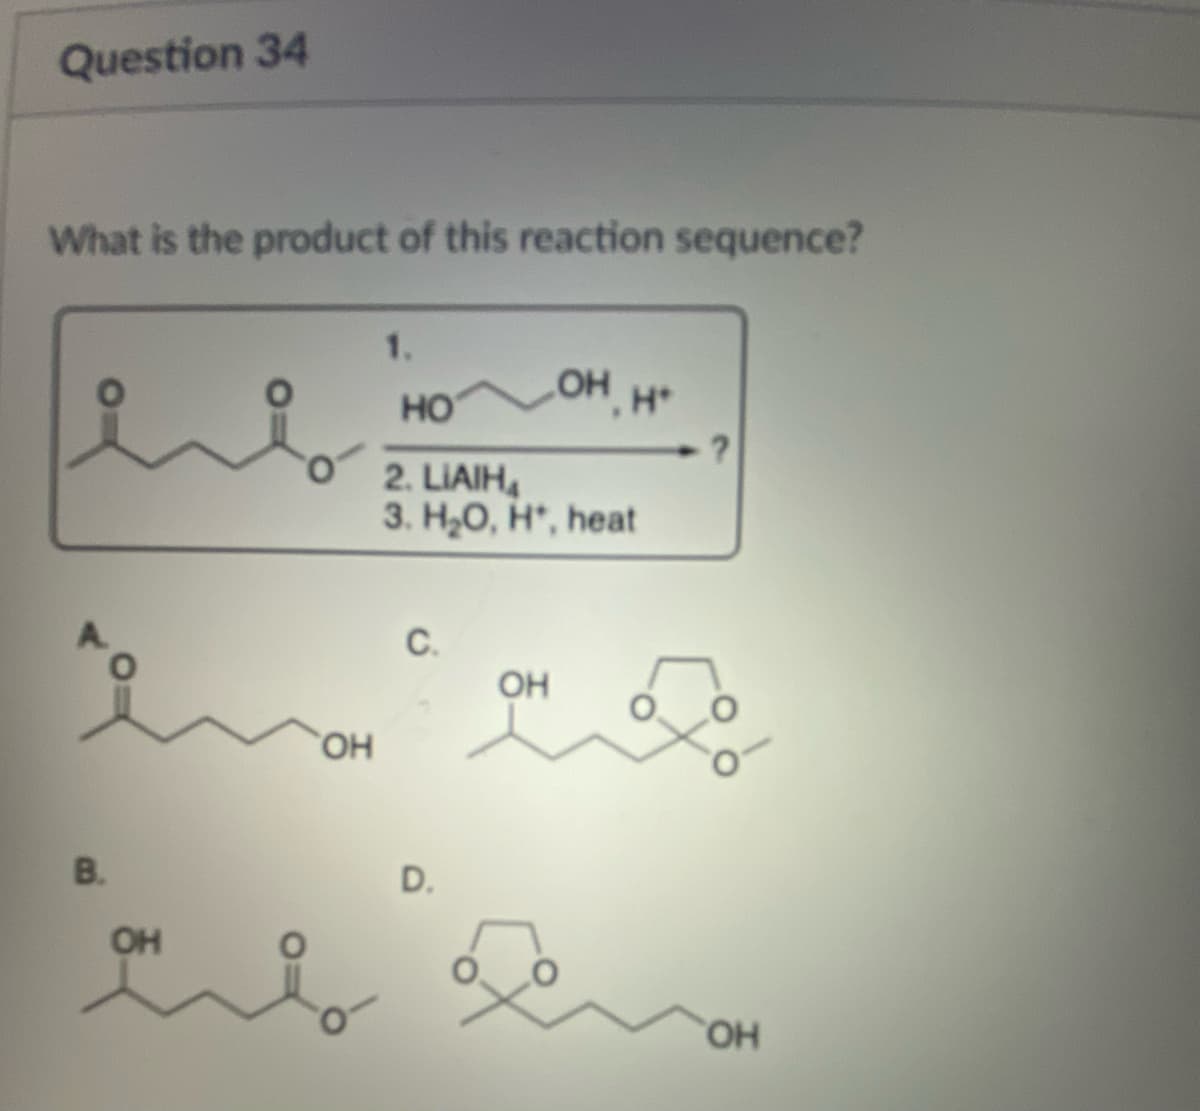 Question 34
What is the product of this reaction sequence?
чи
В.
OH
OH
1.
но он н
2. LIAIH
3. H2O, H, heat
с.
D.
OH
?
ОН